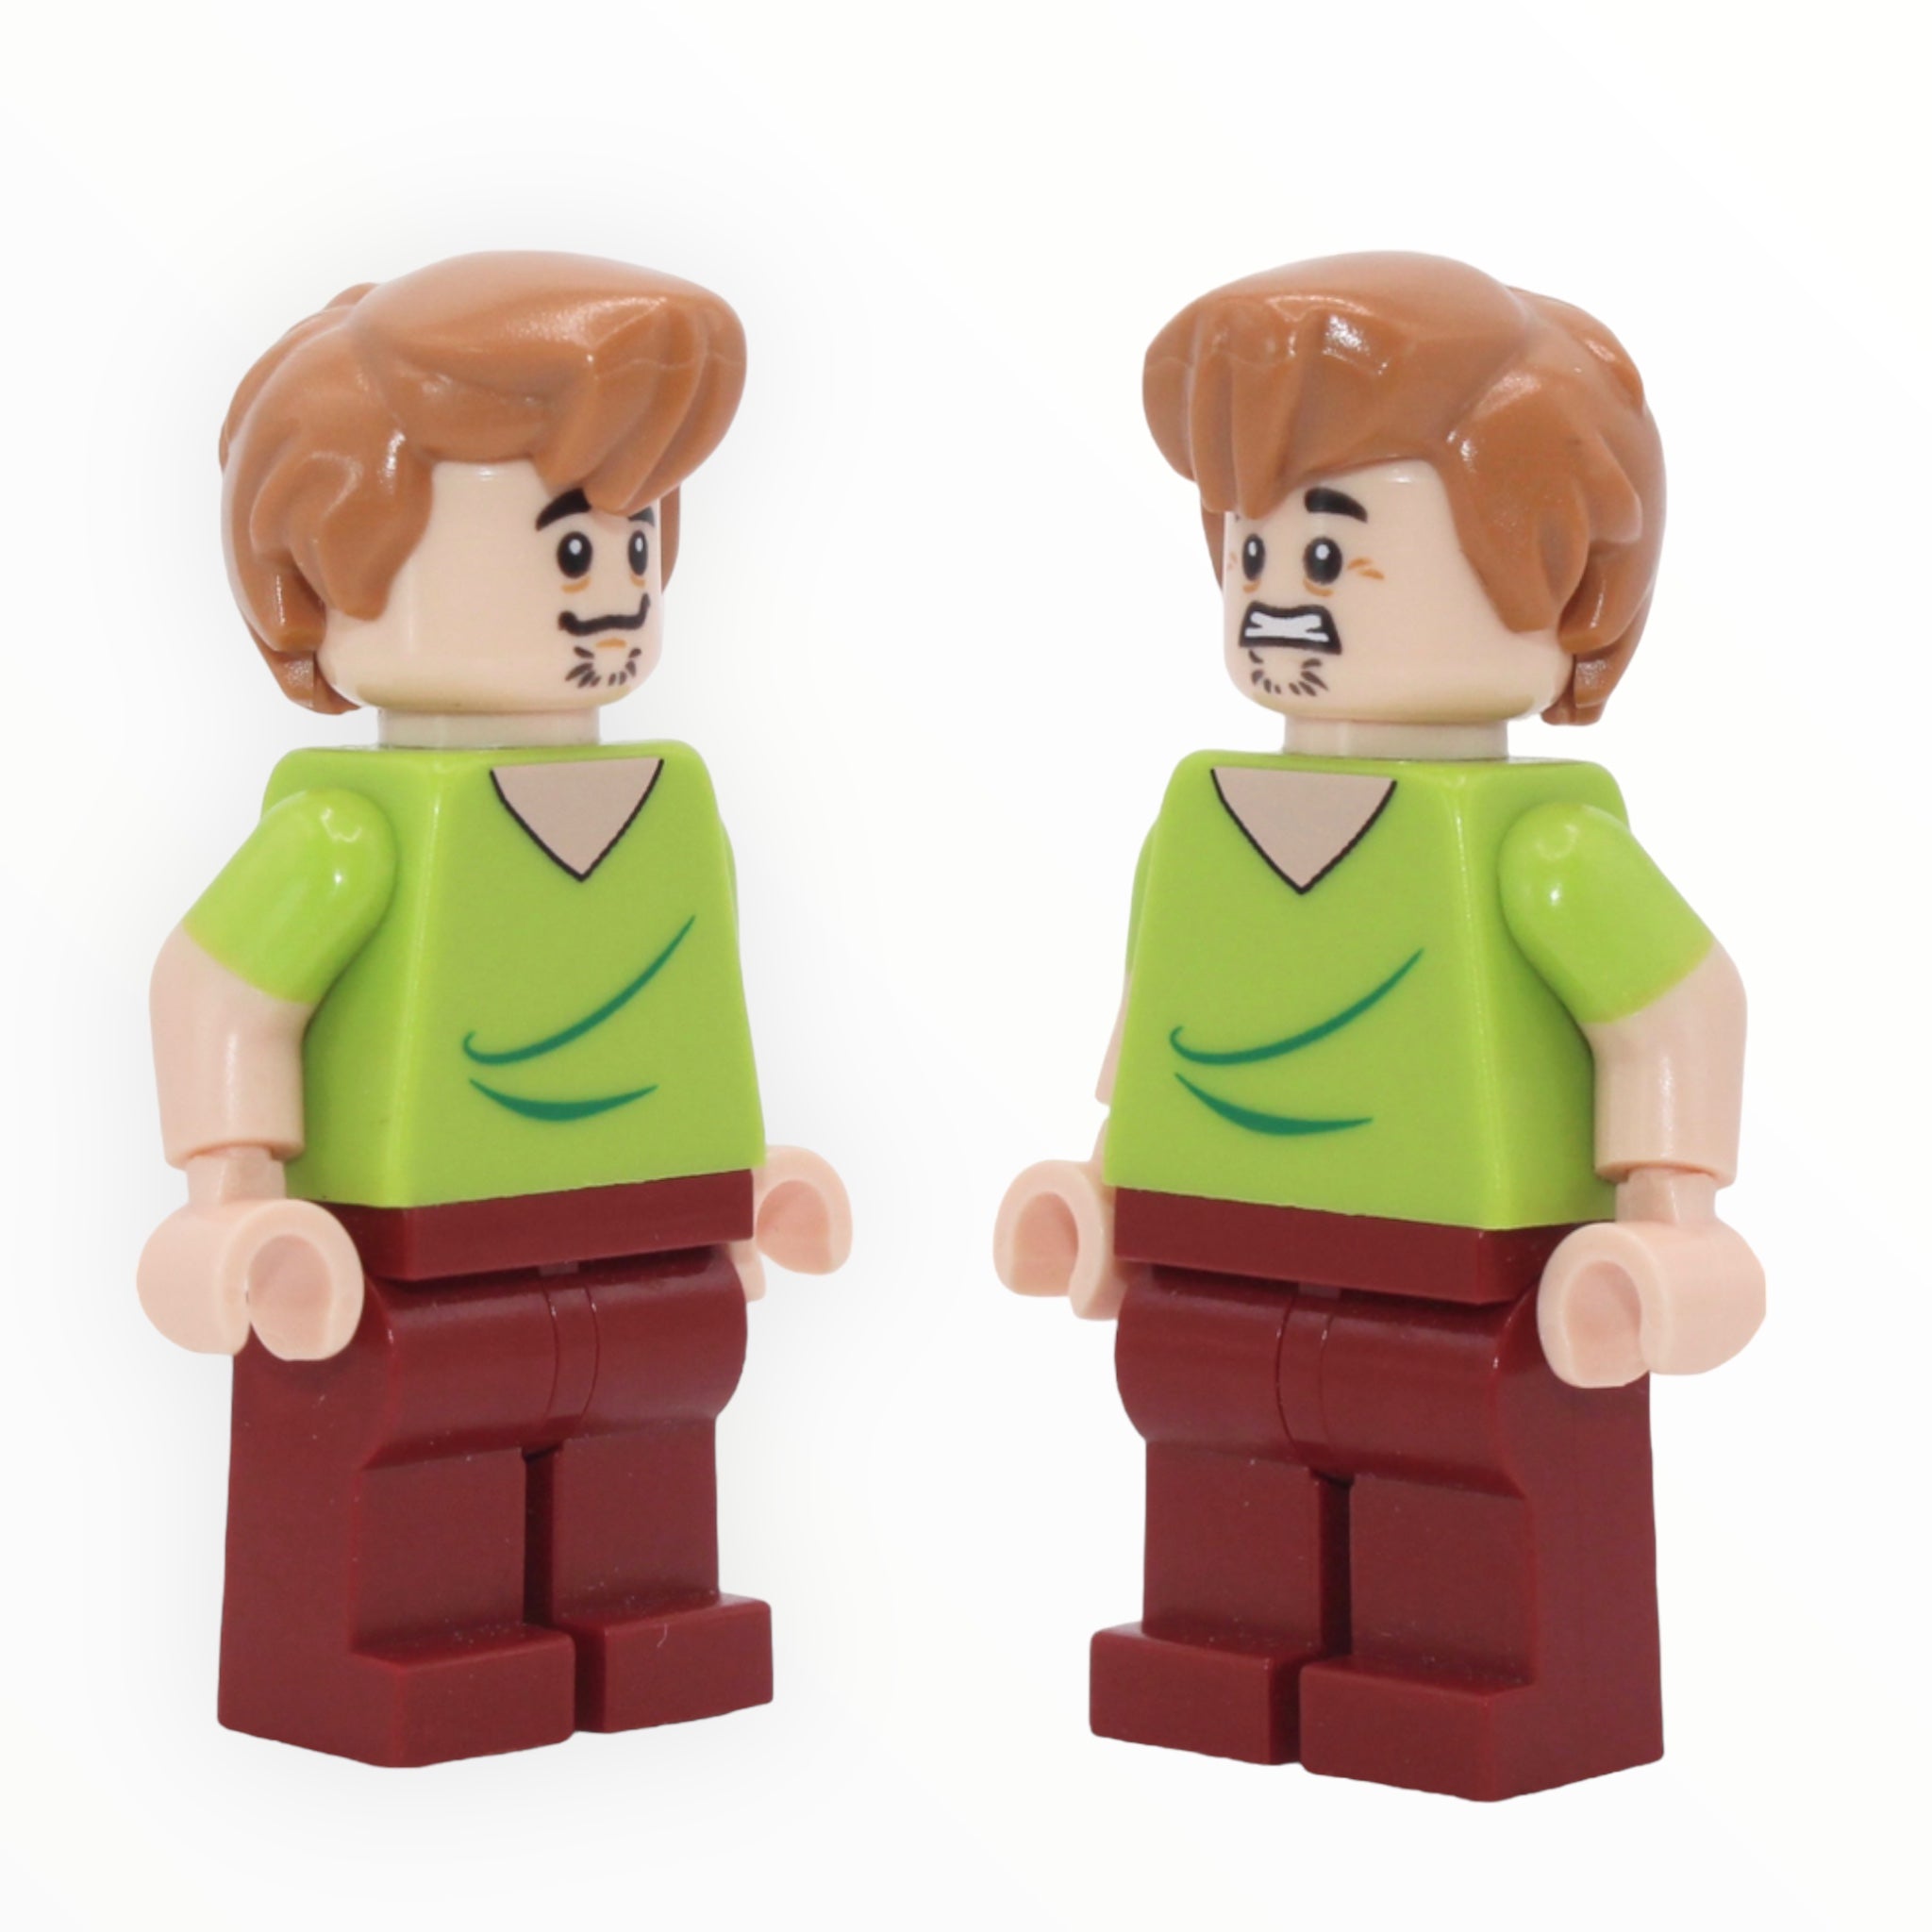 Shaggy Rogers (smile and scared)